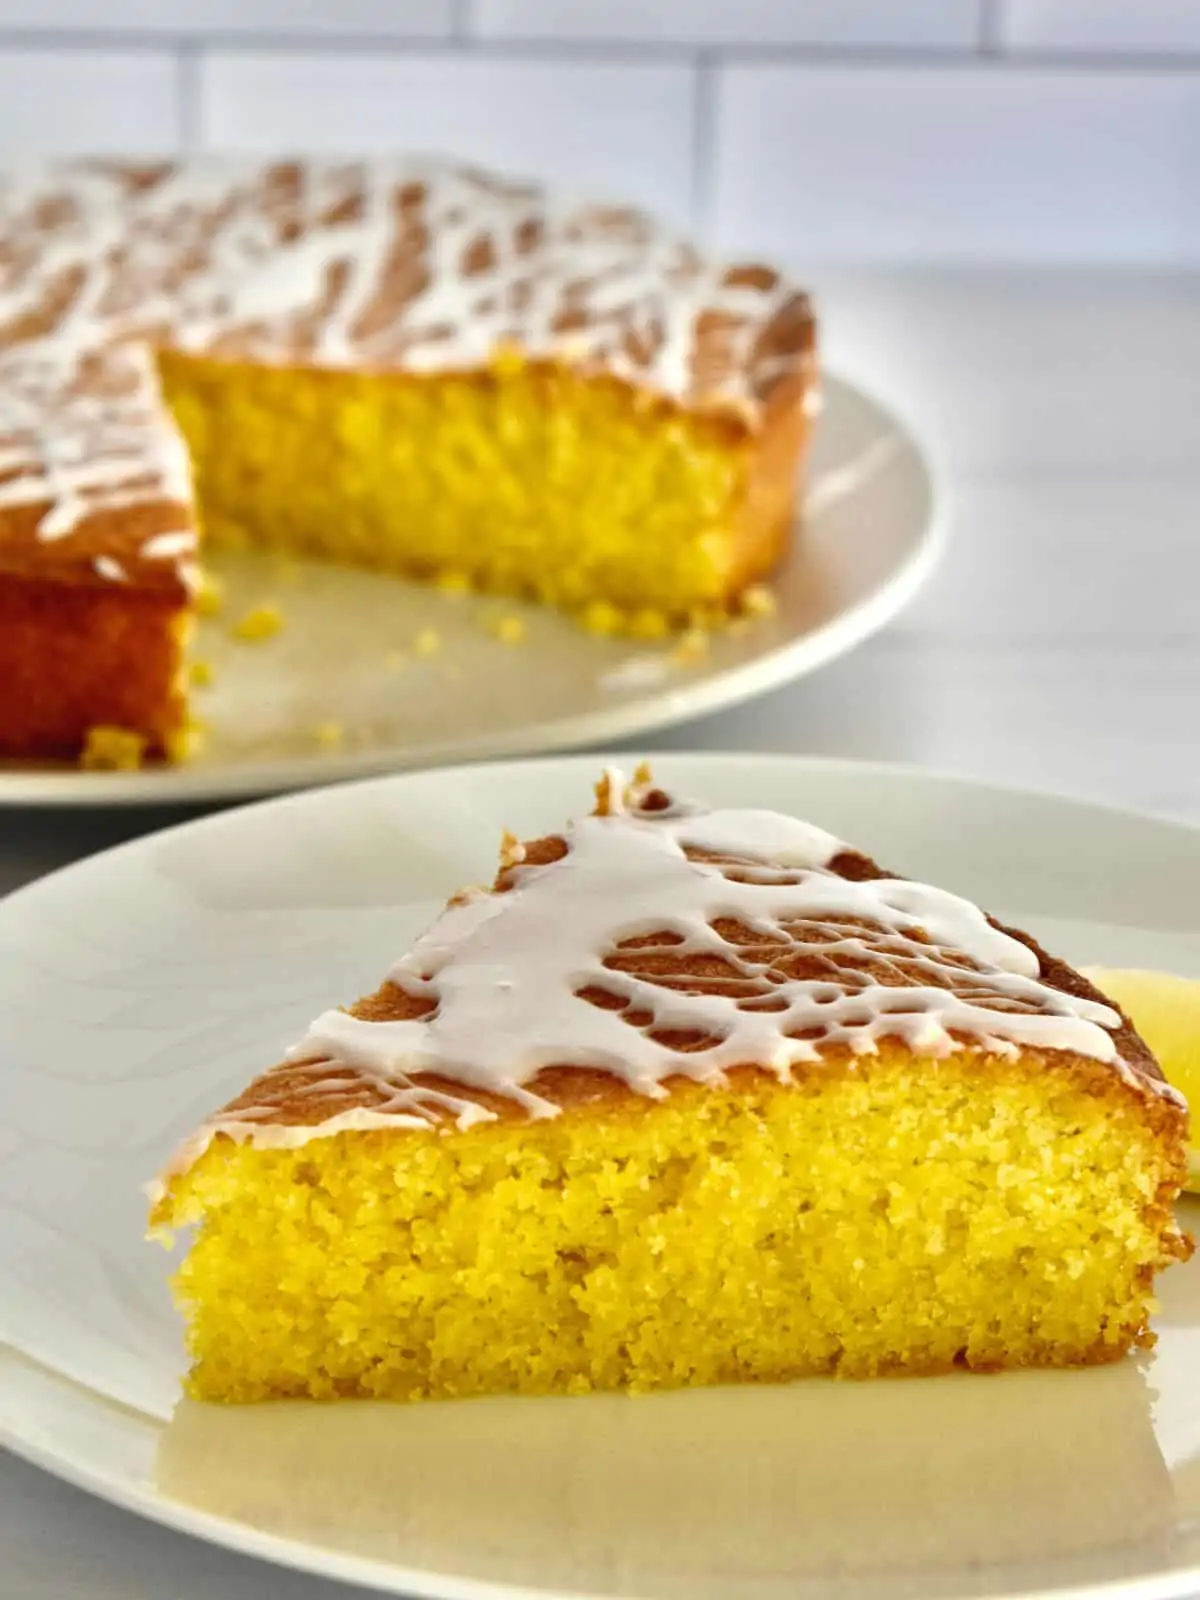 Lemon Polenta Cake slice on a white plate with the cake in the background.